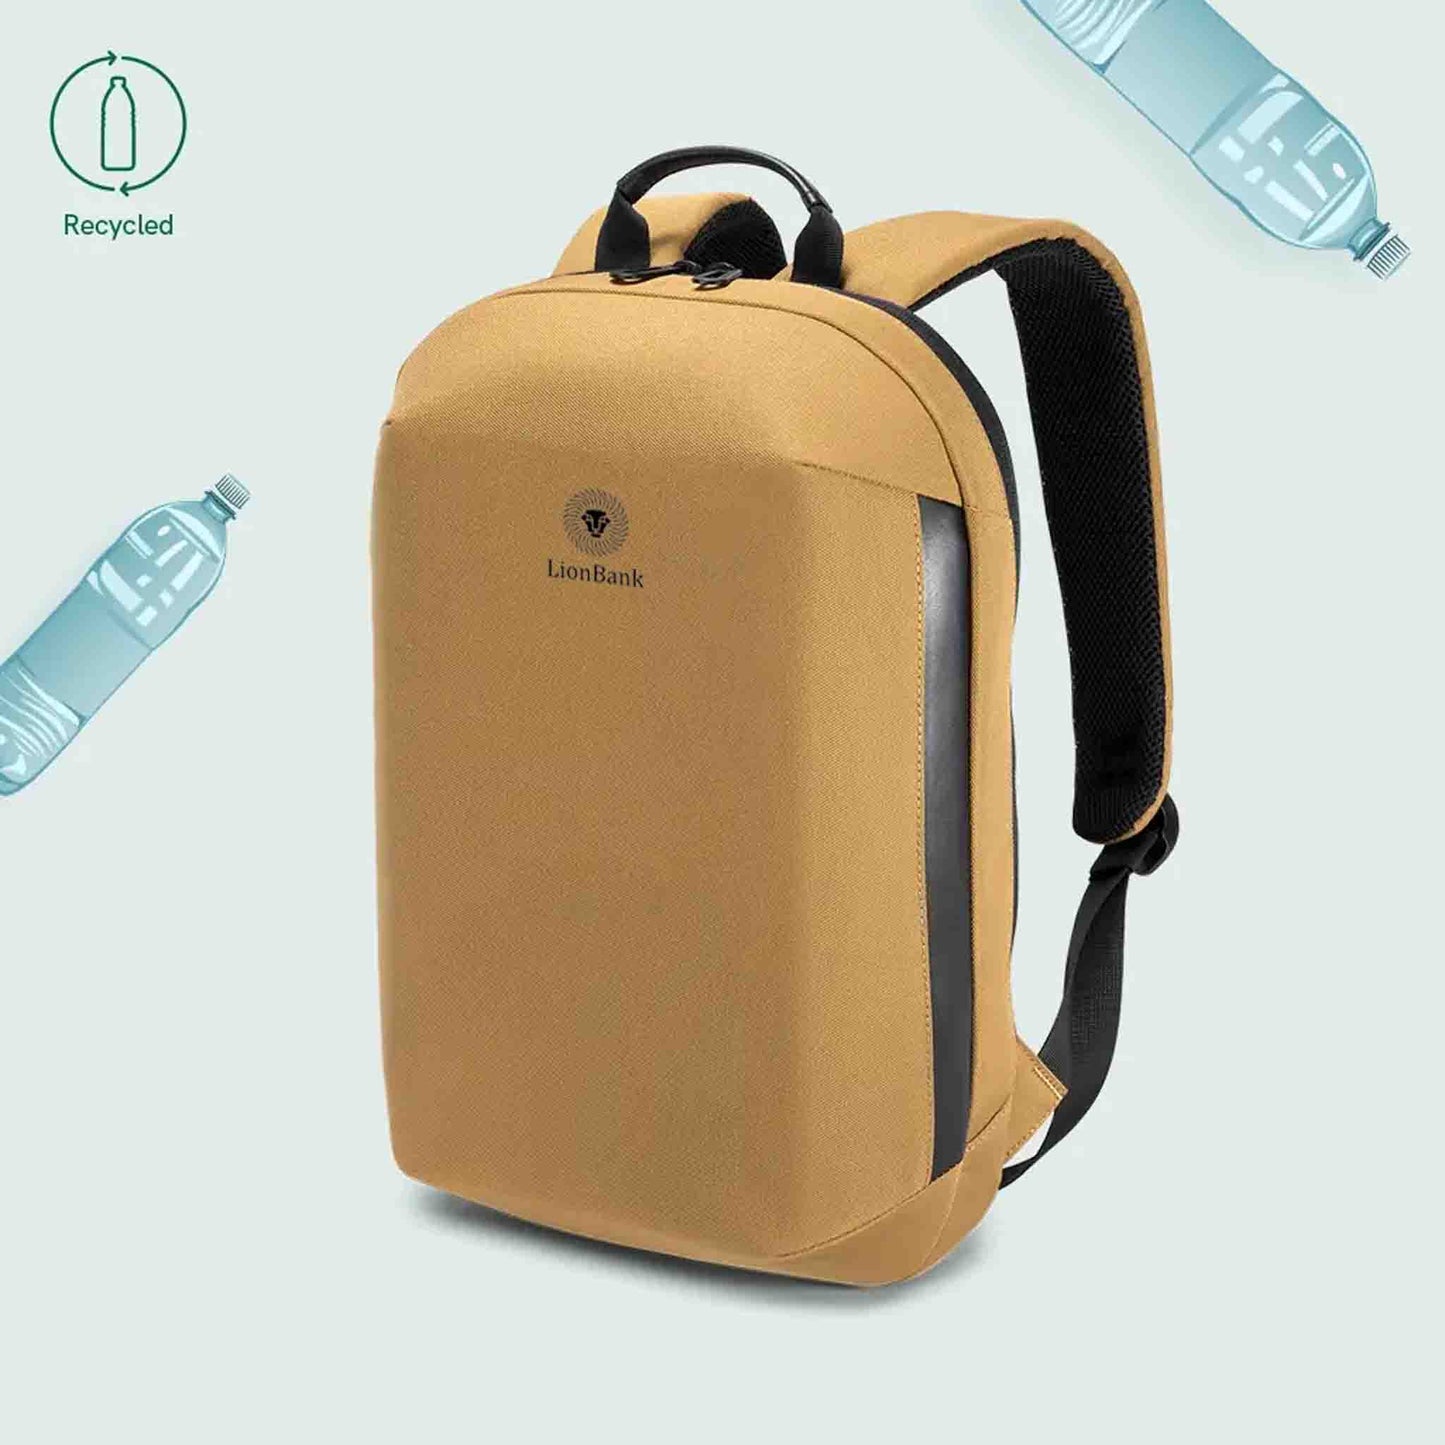 MagPack RPET "easy" backpack